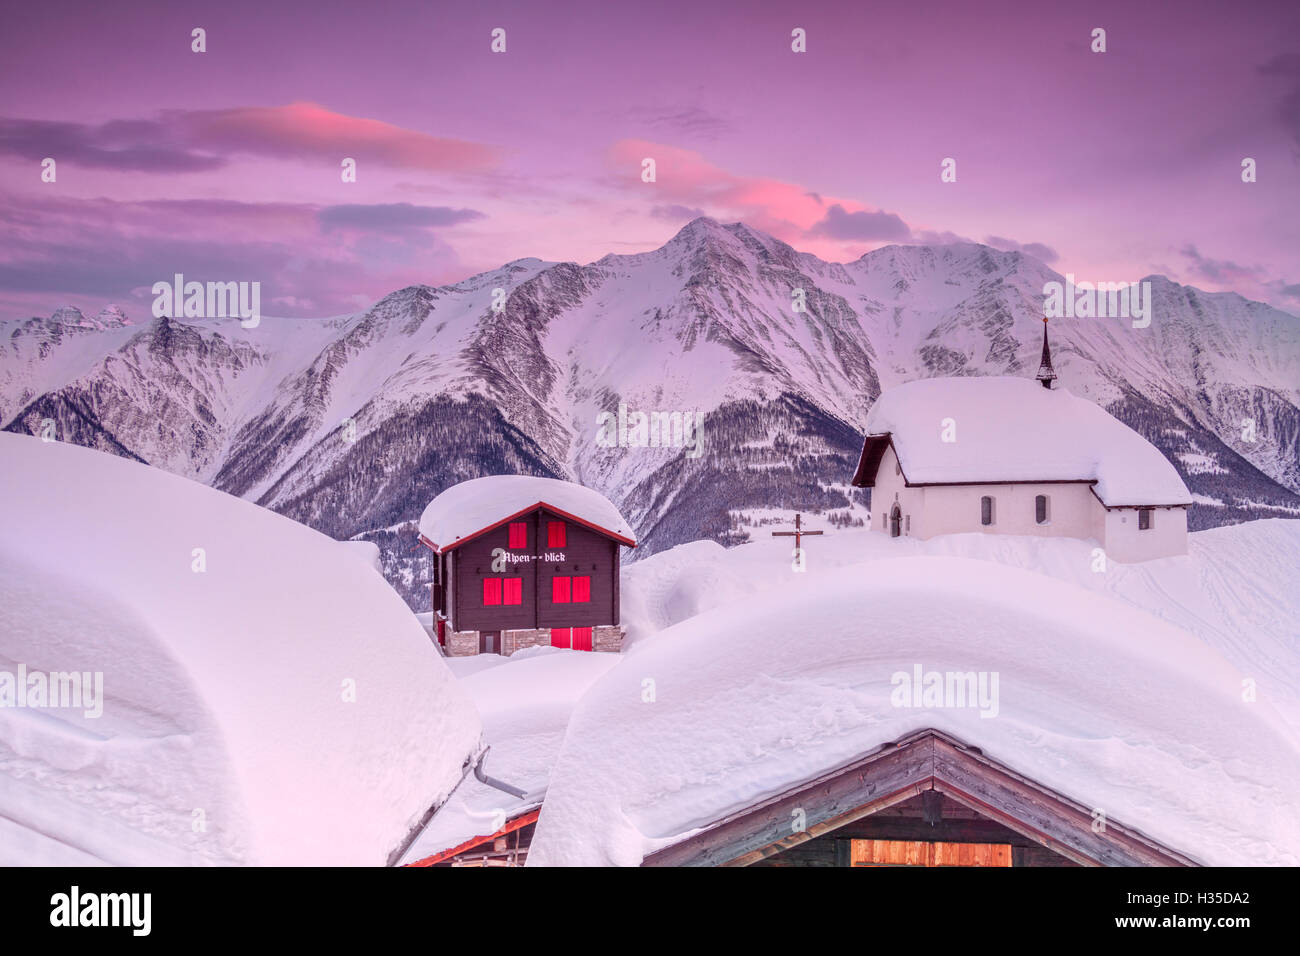 Pink sky at sunset frames the snowy mountain huts and church, Bettmeralp, district of Raron, canton of Valais, Switzerland Stock Photo